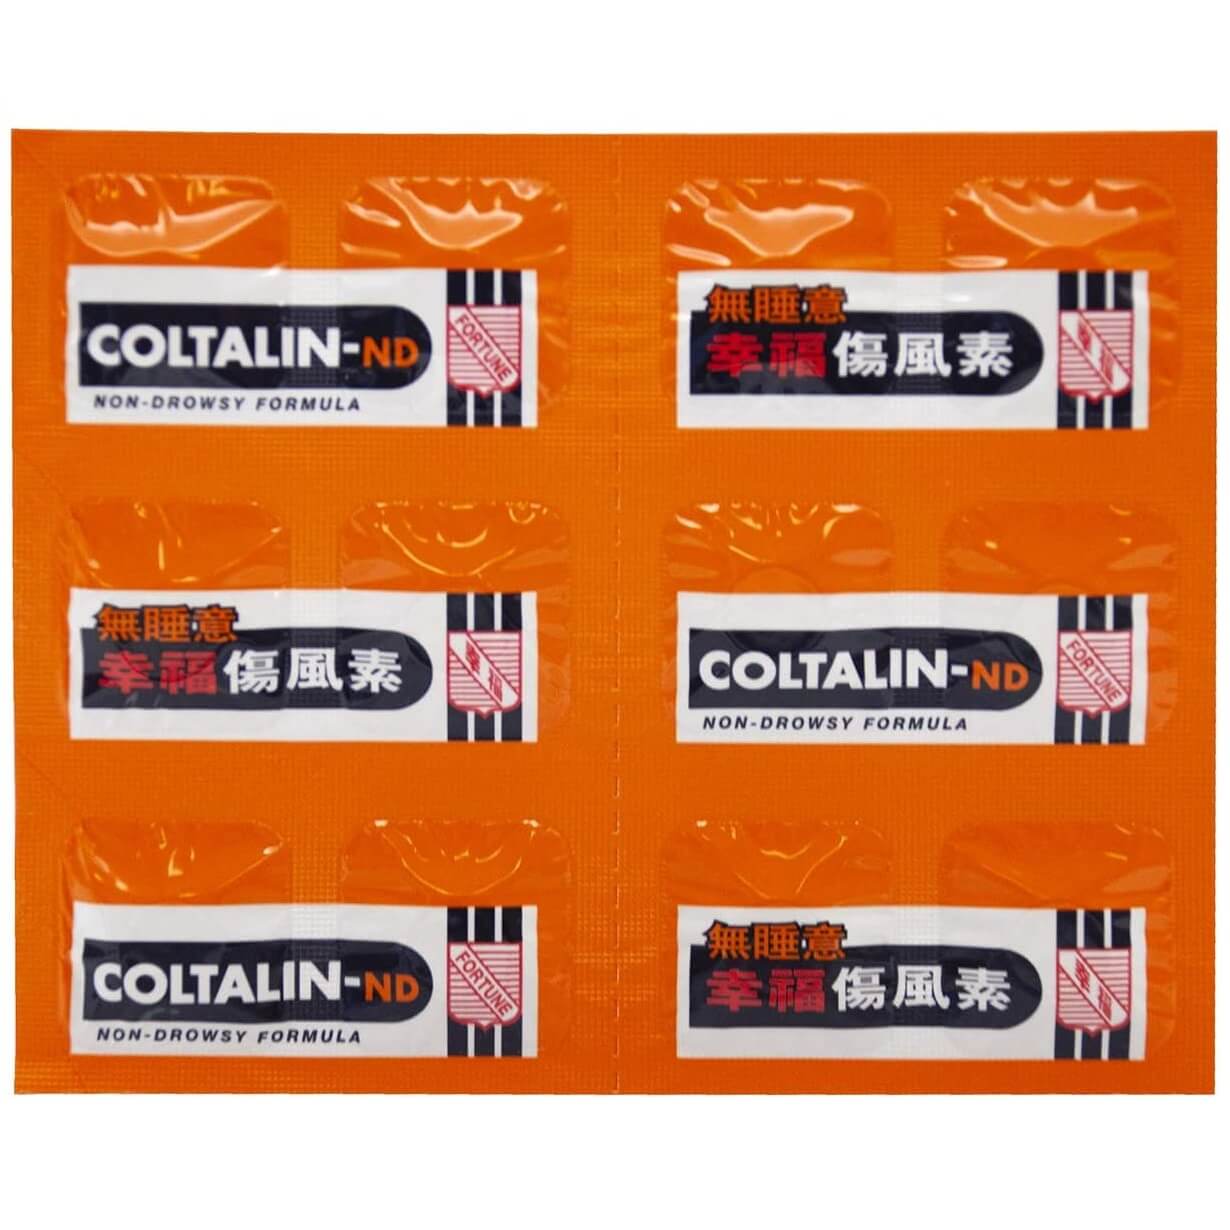 Coltalin-ND, Non-Drowsy Cold Relief (36 Tablets) - Buy at New Green Nutrition